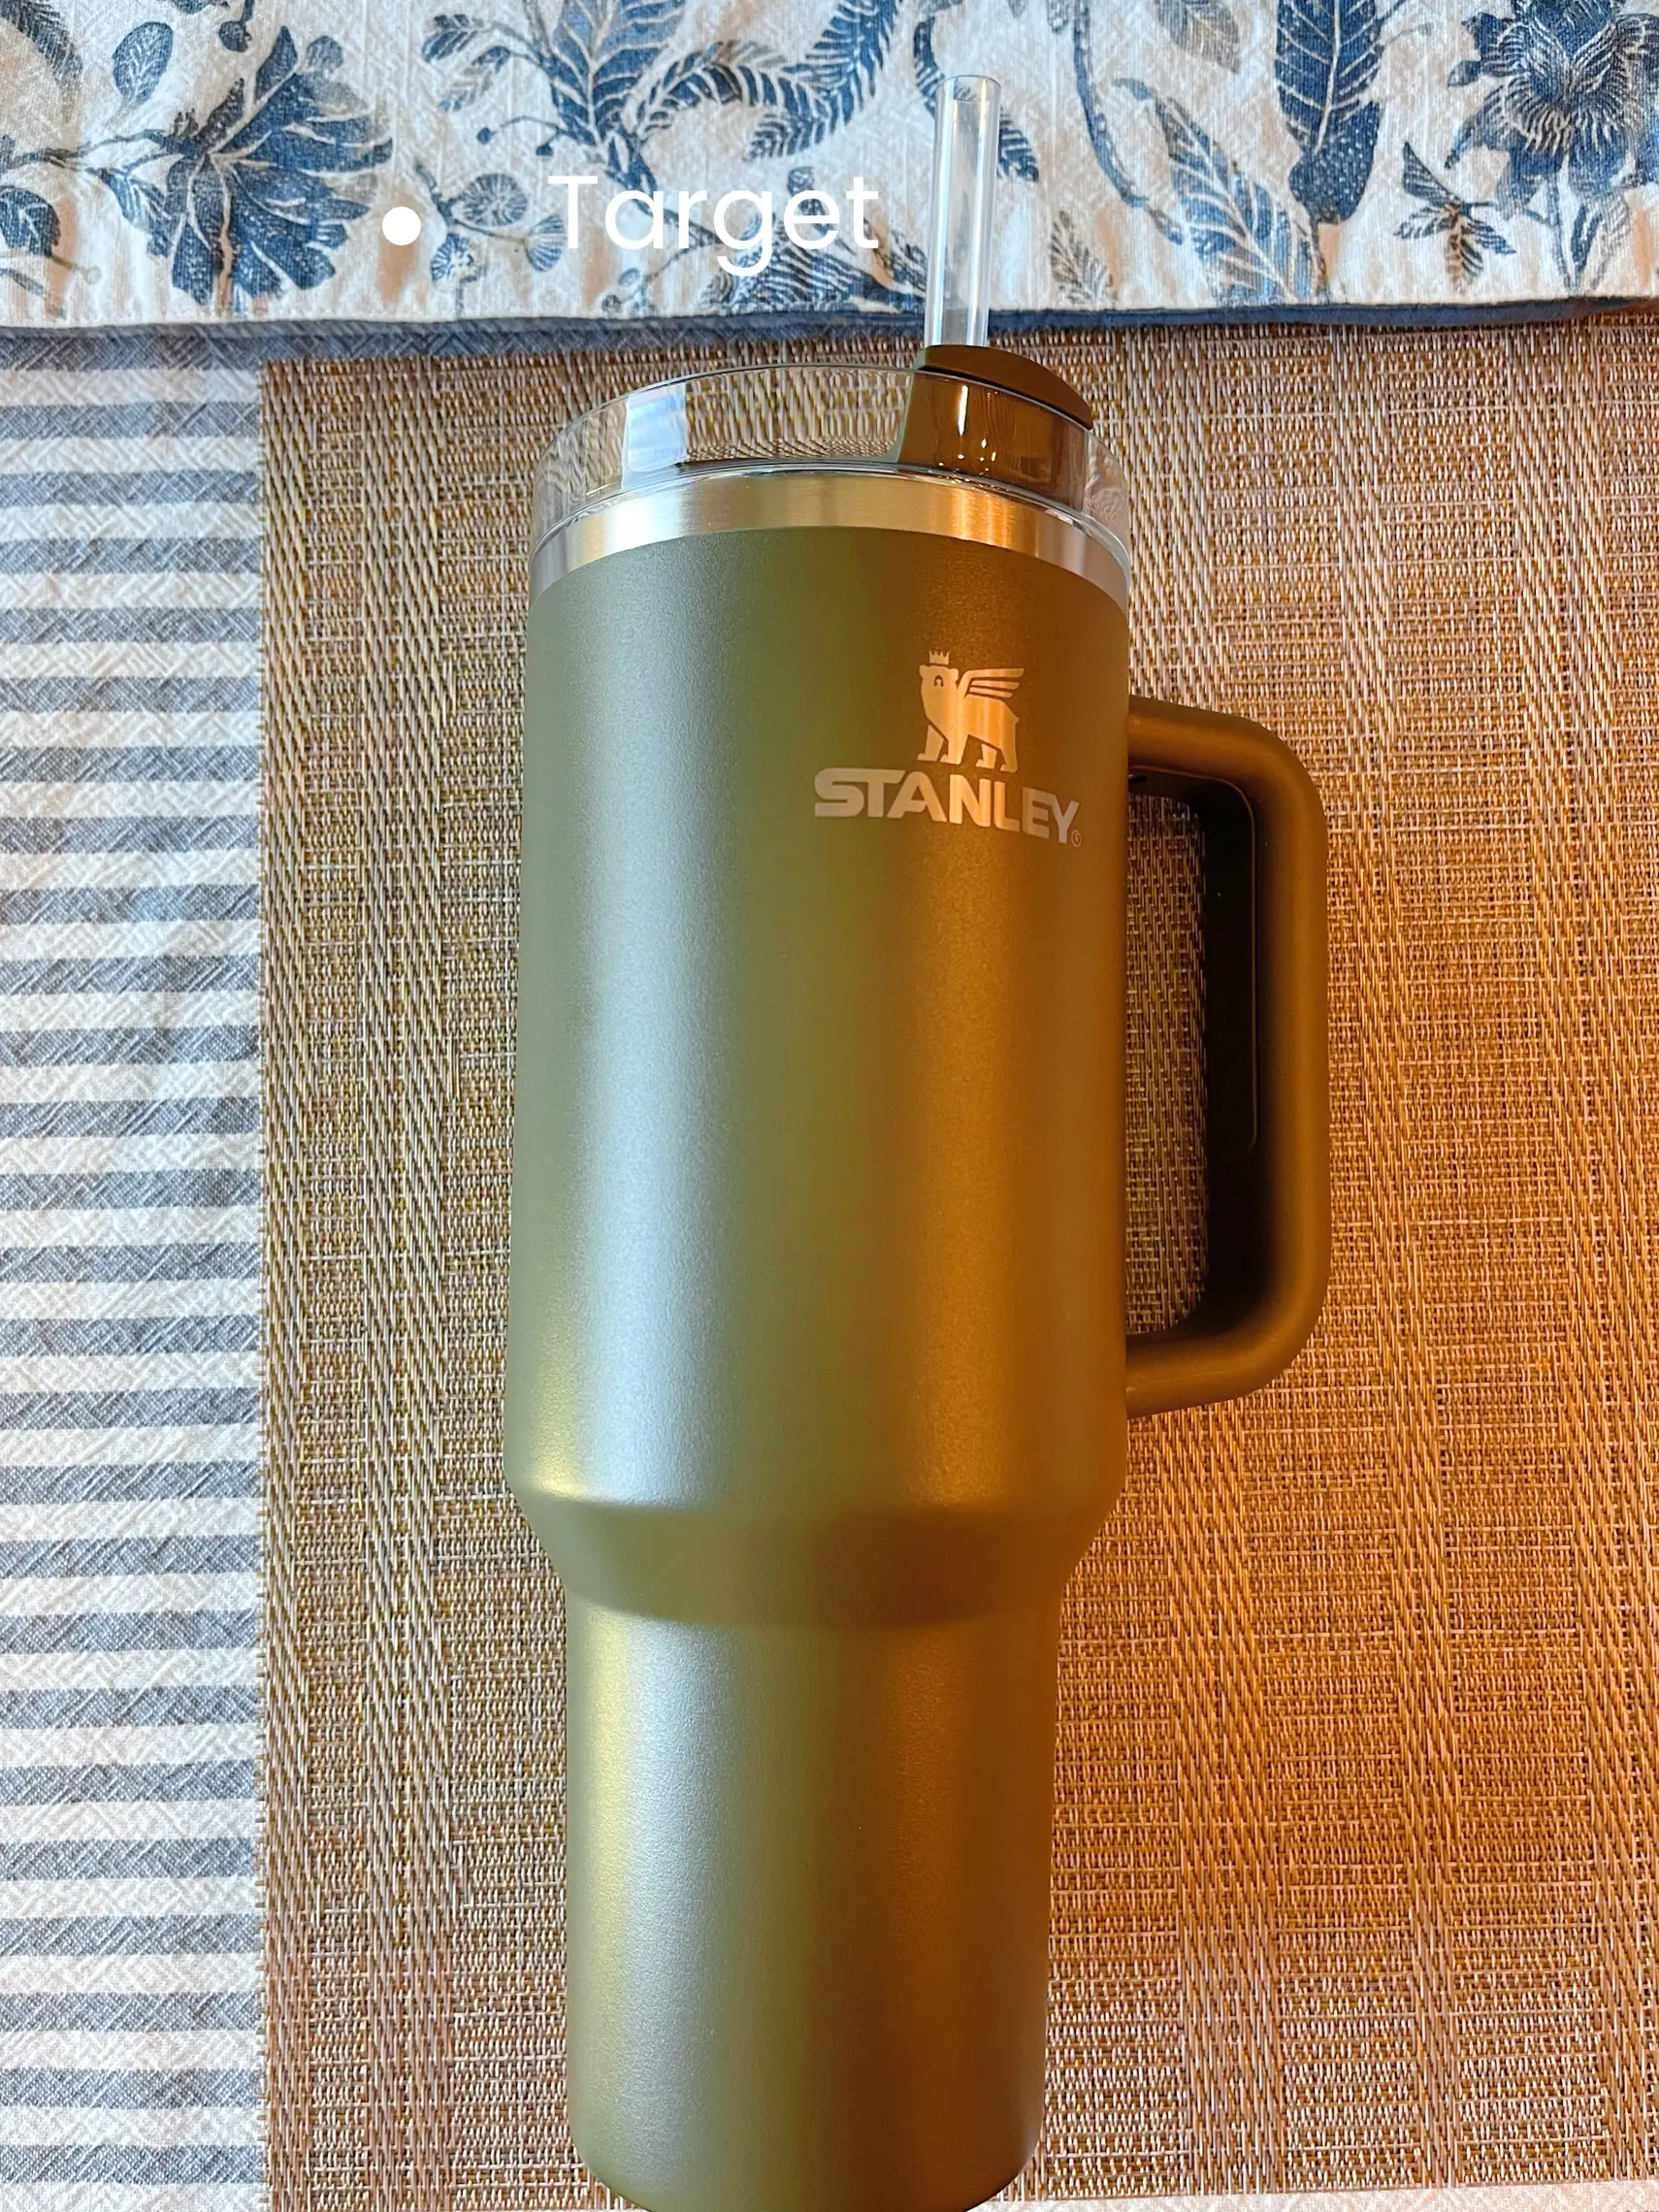 RUN TO MY STOREFRONT RN #stanley 30 oz with handle!!!